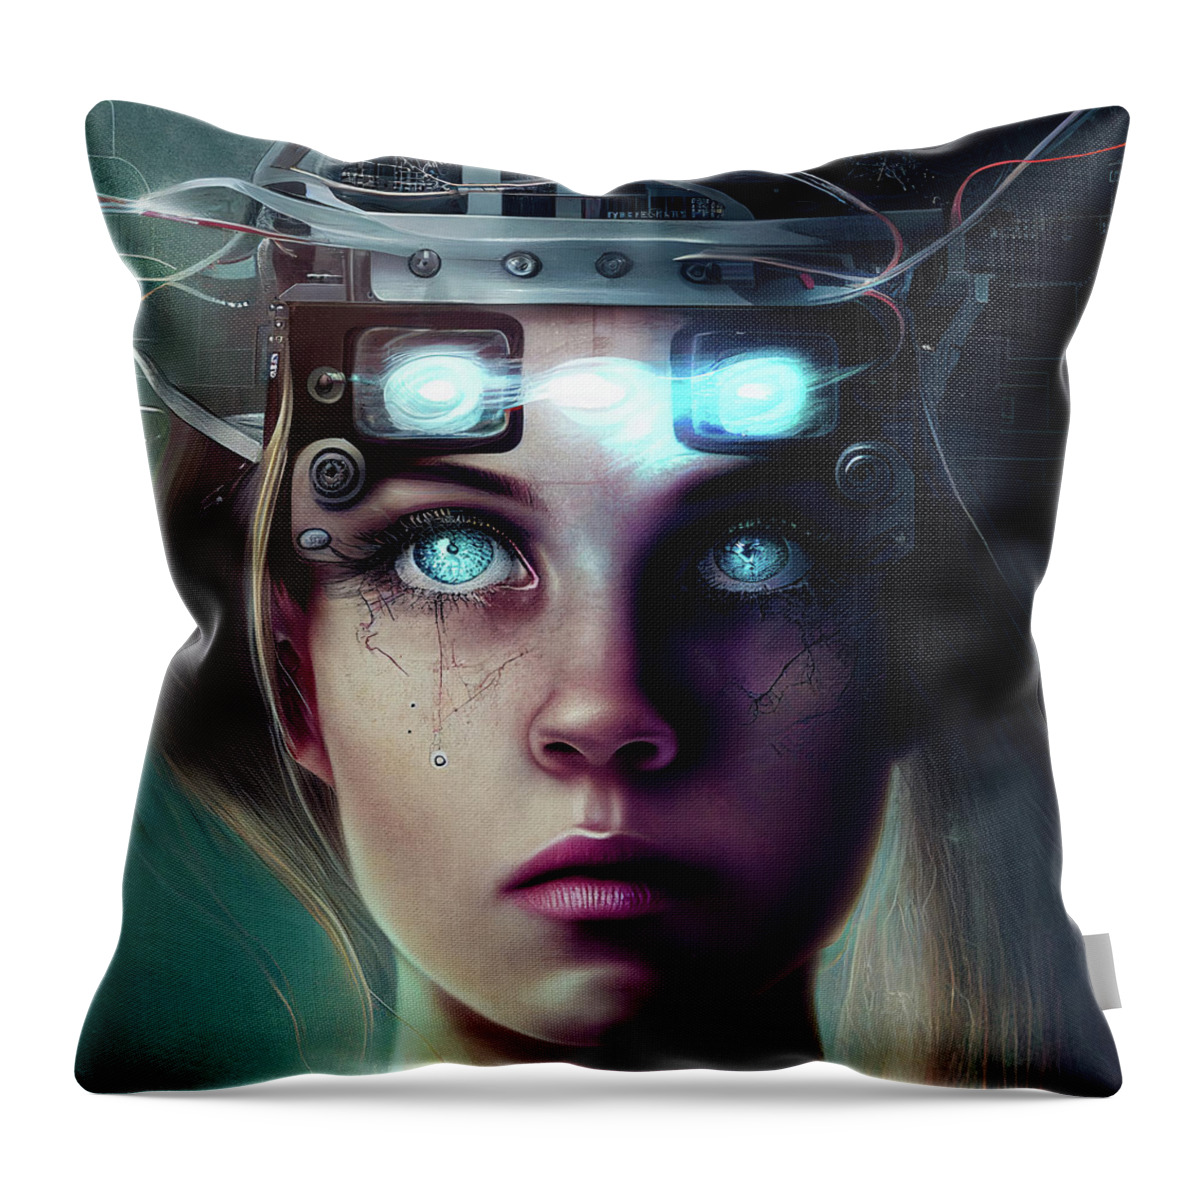 Woman Throw Pillow featuring the digital art Surreal Art 15 Mind Control Woman Portrait by Matthias Hauser